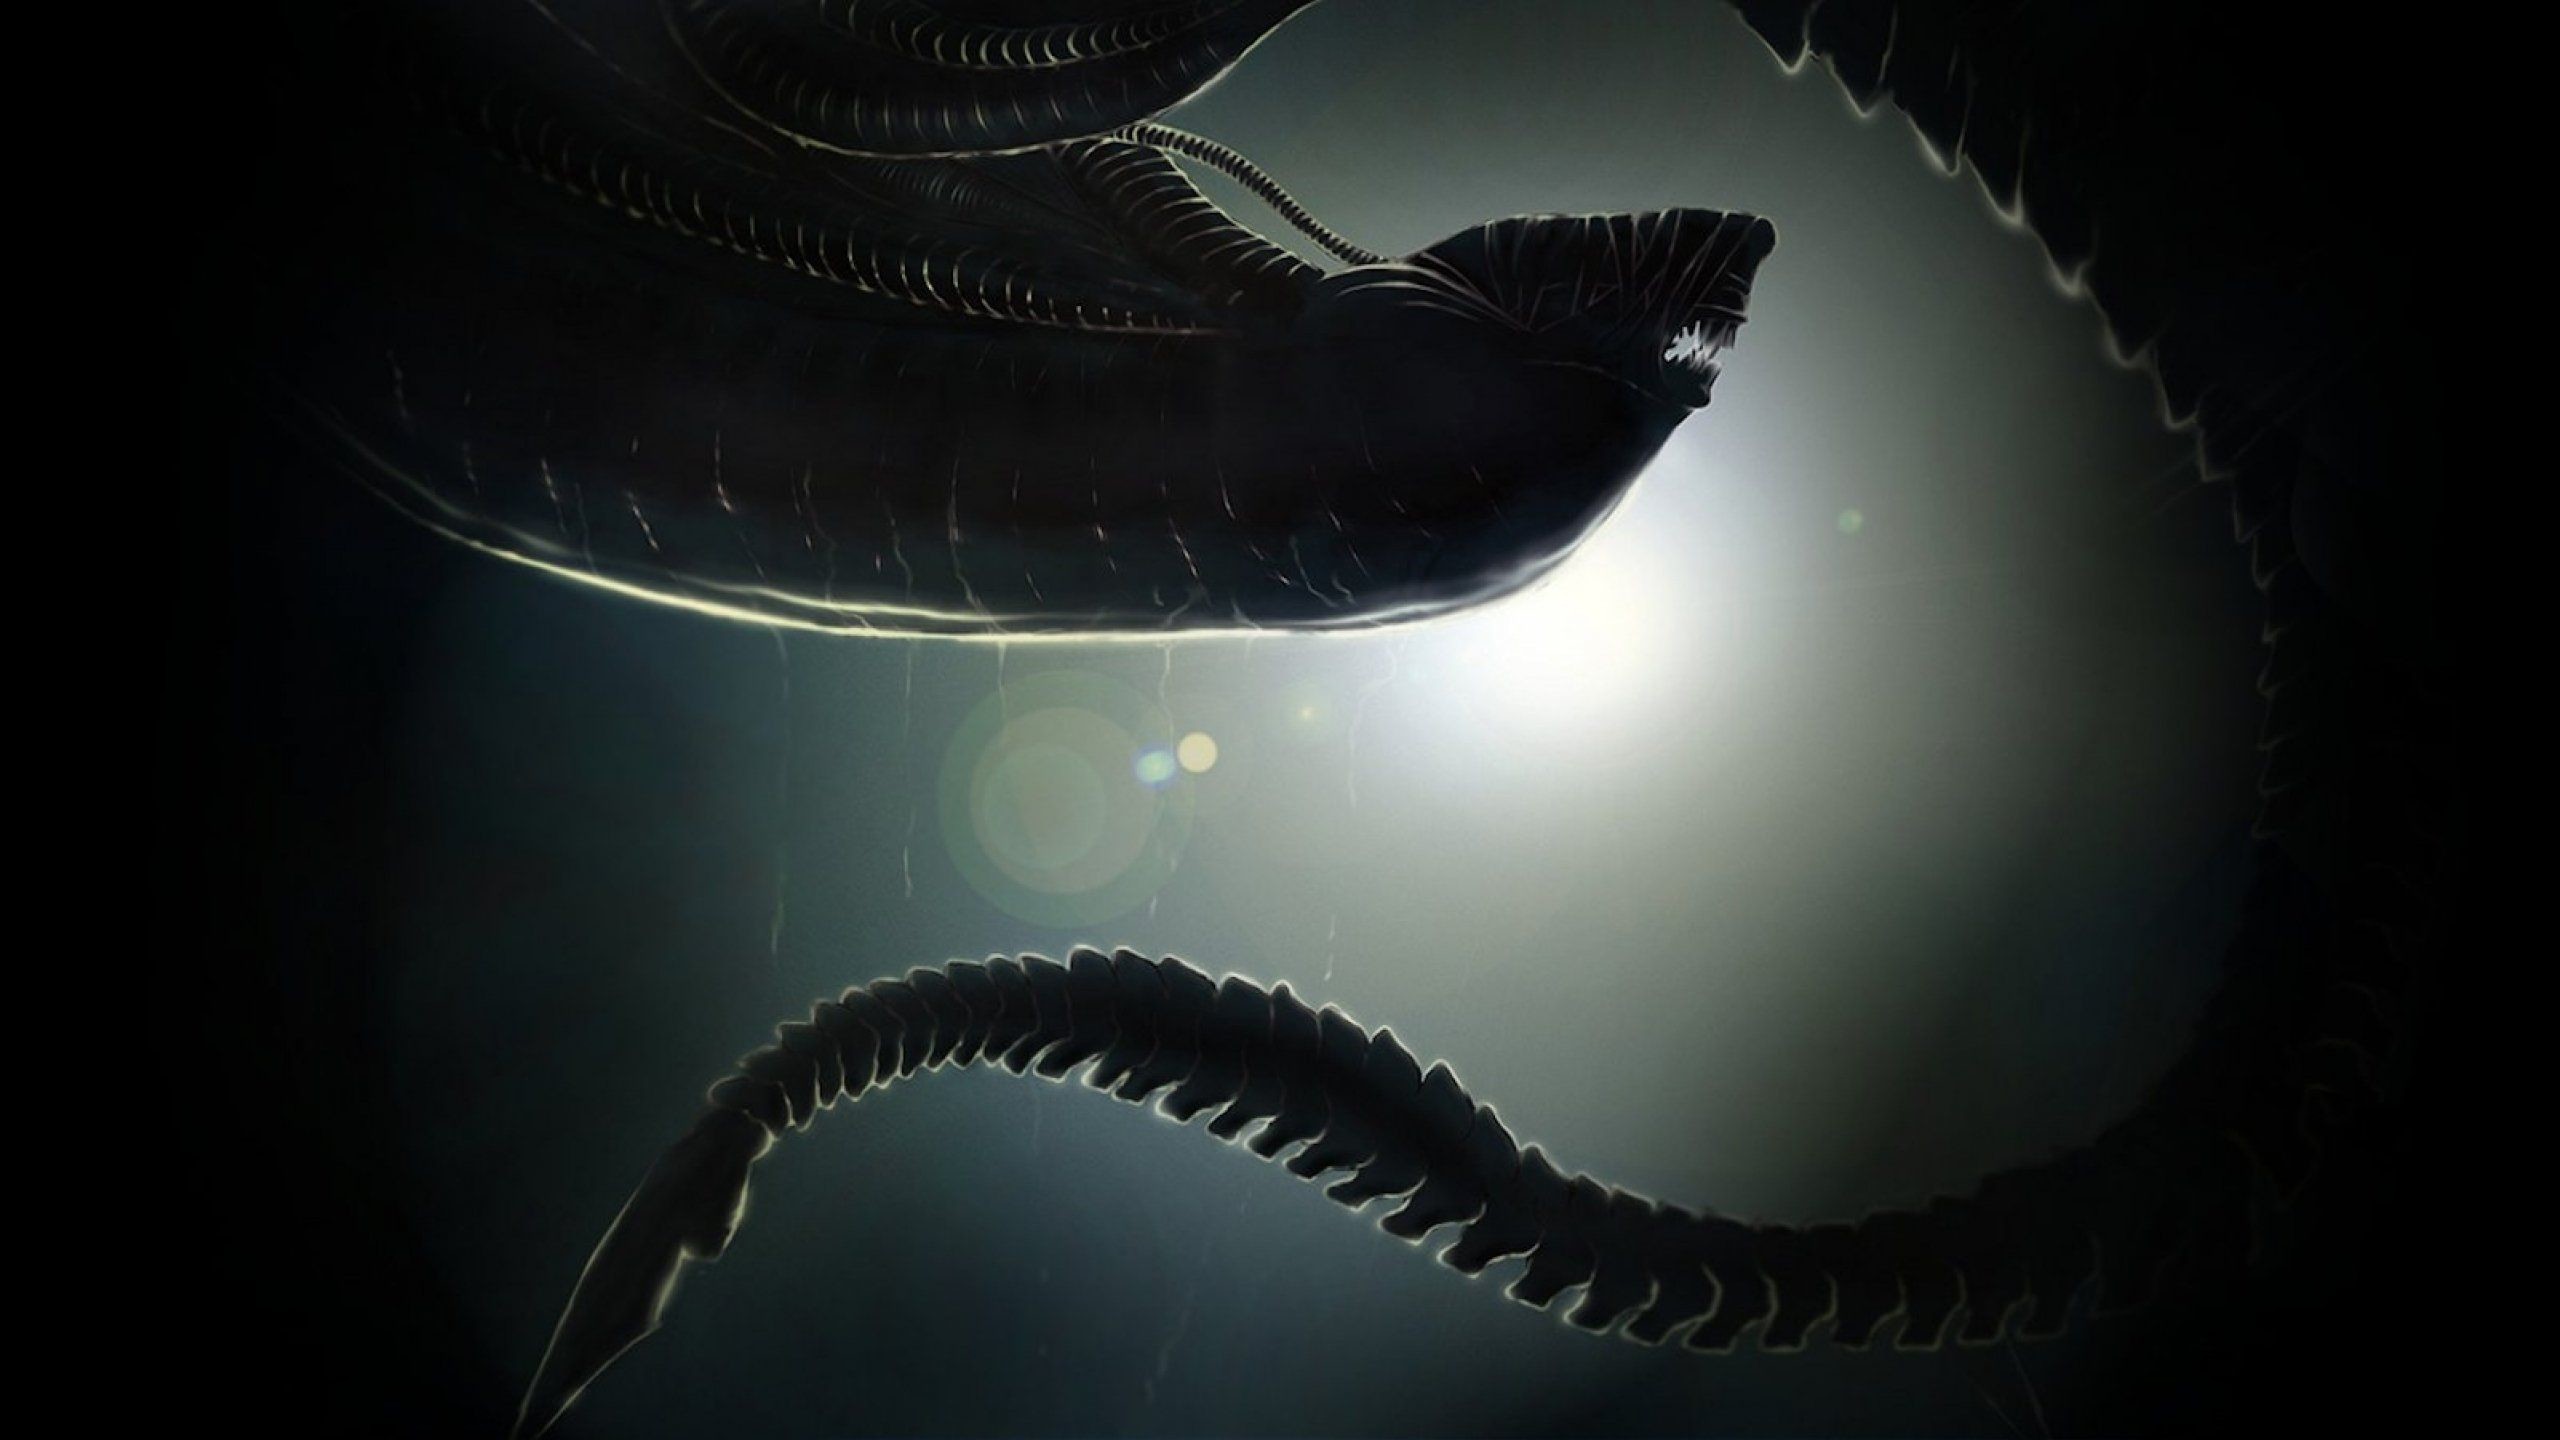 2560x1440 Aliens Wallpaper High Resolution For Desktop Wallpaper 2560 x 1440 px 1.08  MB queen tumblr colonial marines xenomorph artwork isolation 1986 iphone  real